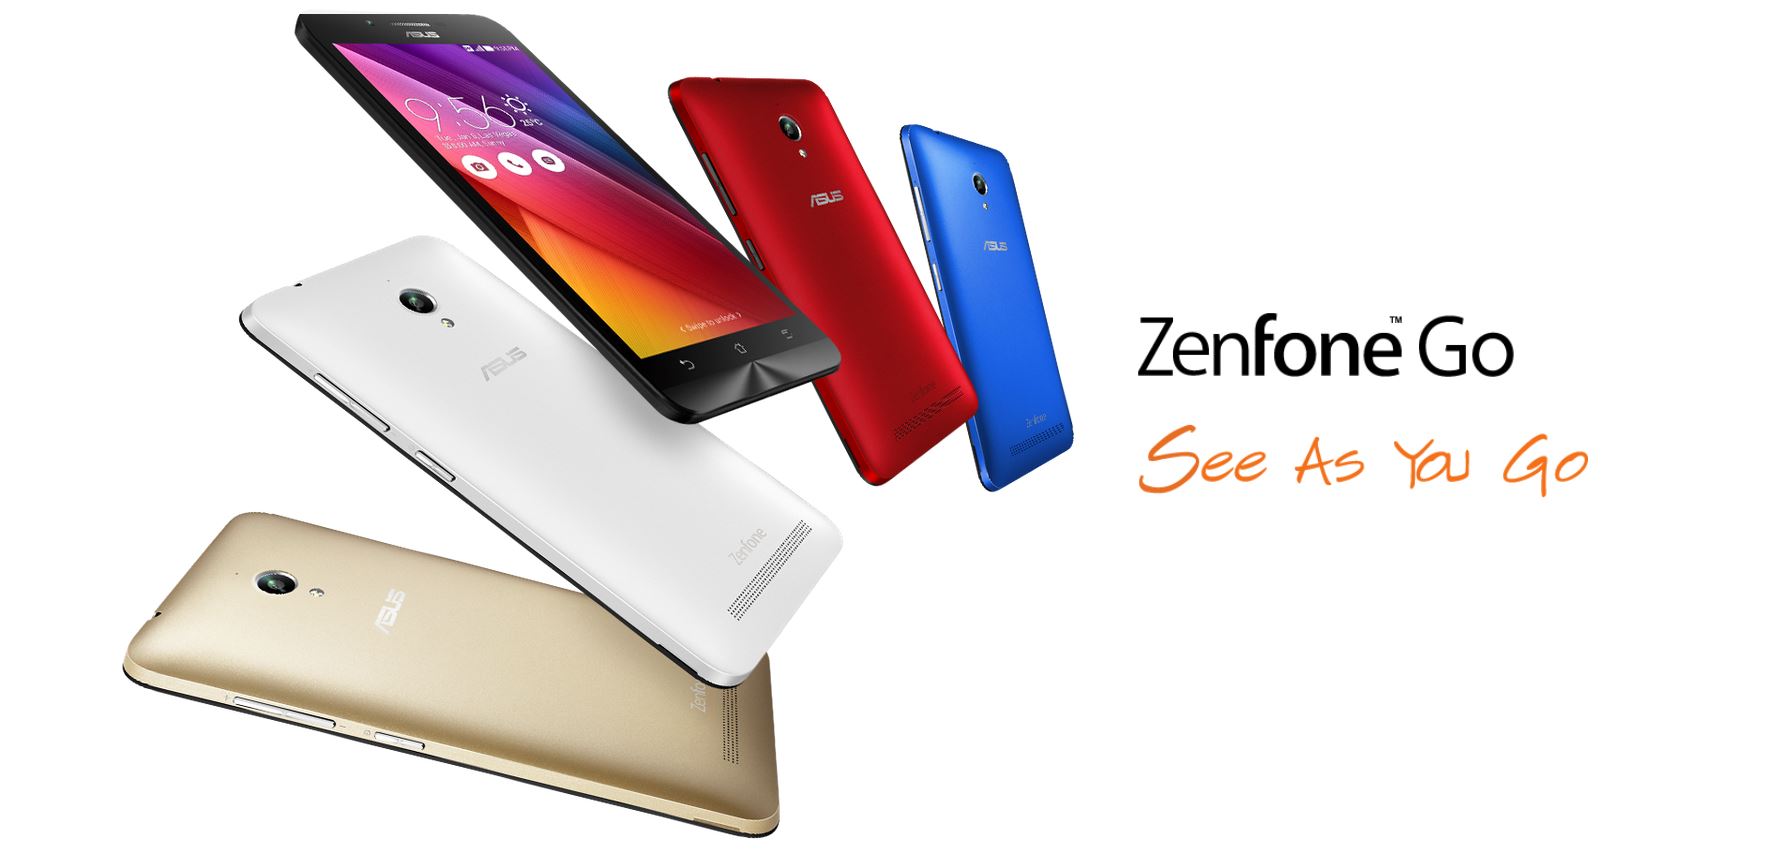 ASUS Zenfone GO is now available in ASUS MY store 27